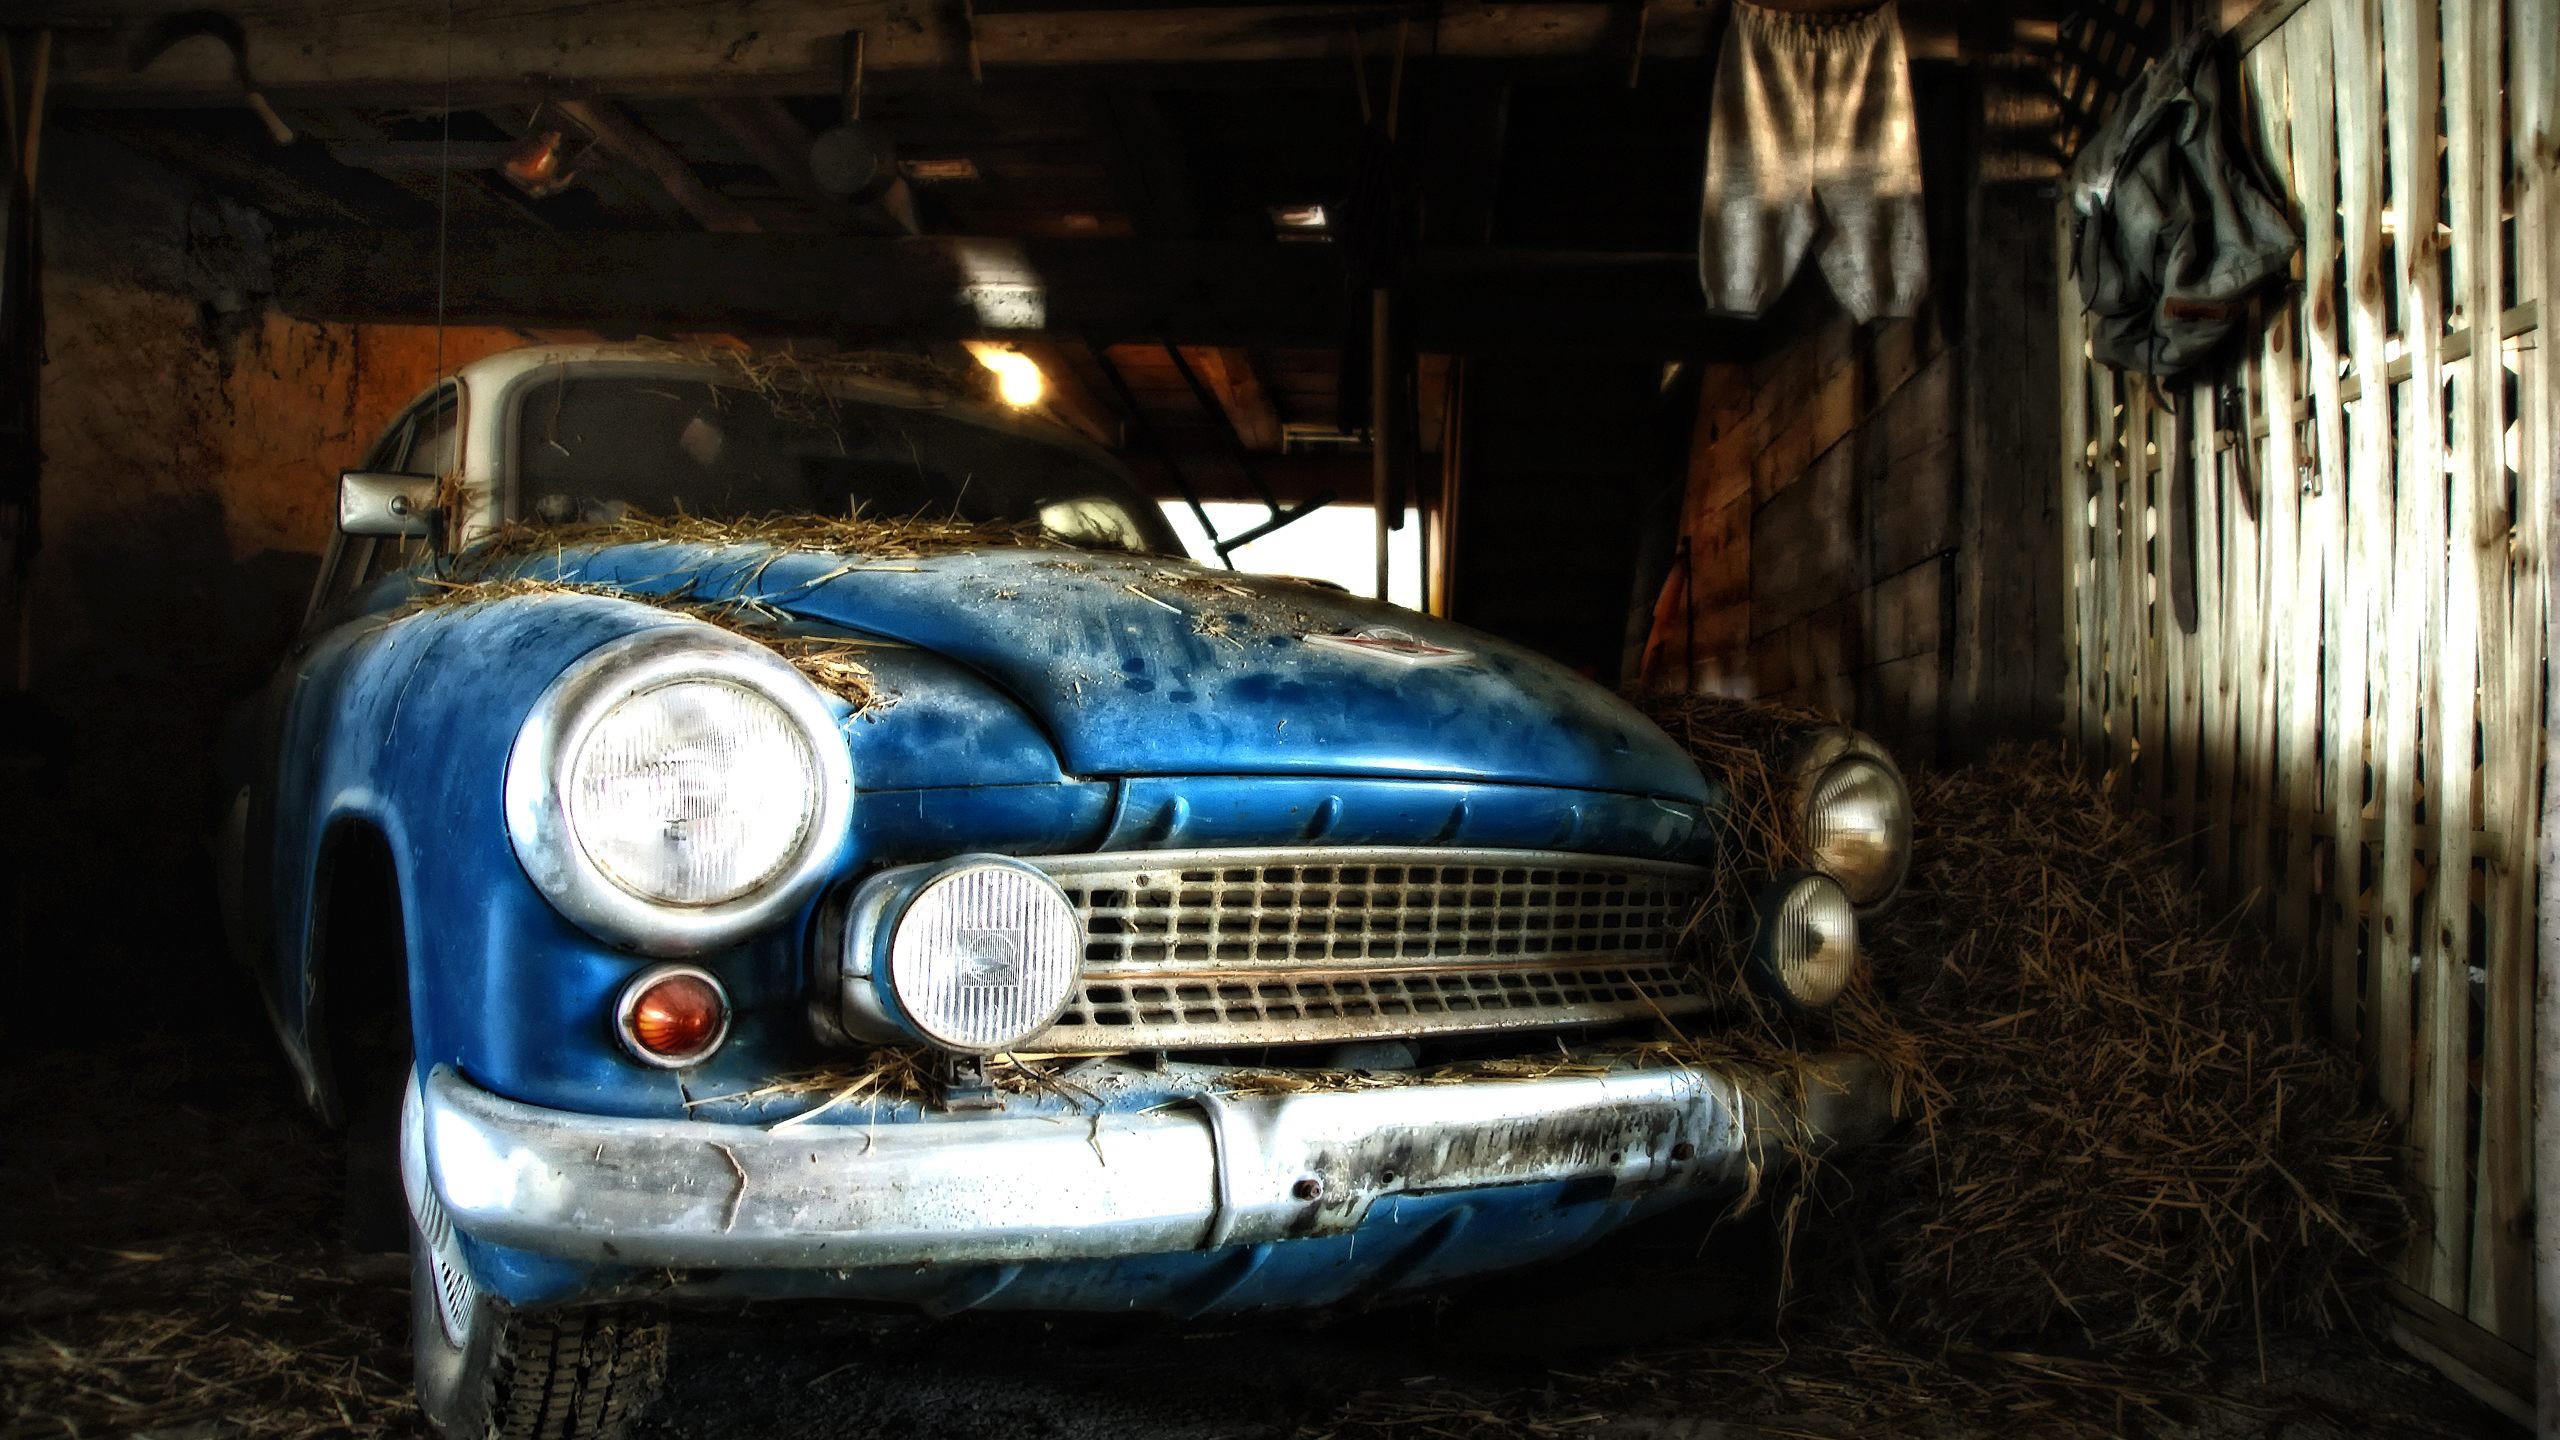 Old time car in a Shack for 2560x1440 HDTV resolution